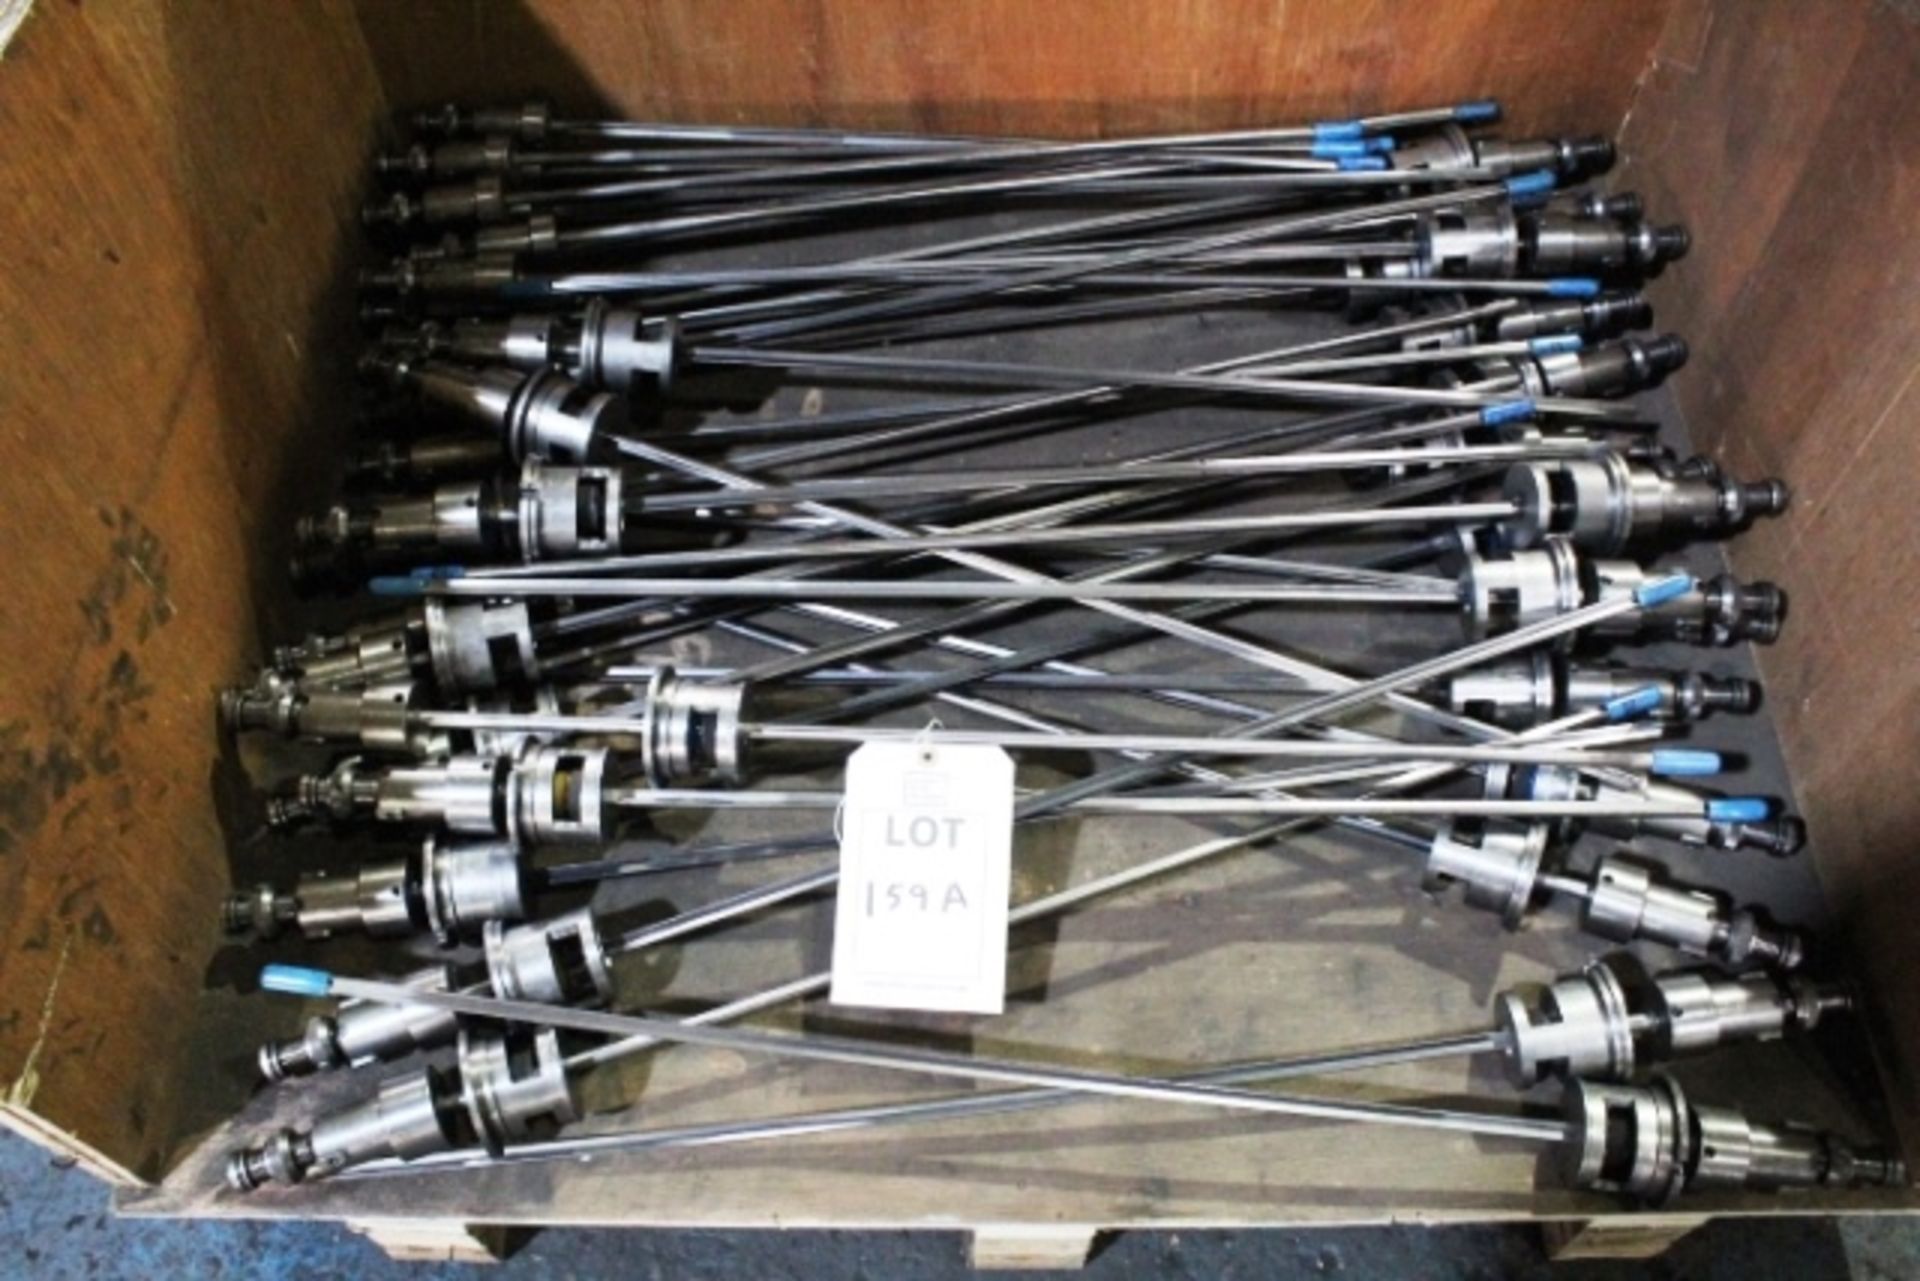 Pallet of assorted gun drills and drill tool holders